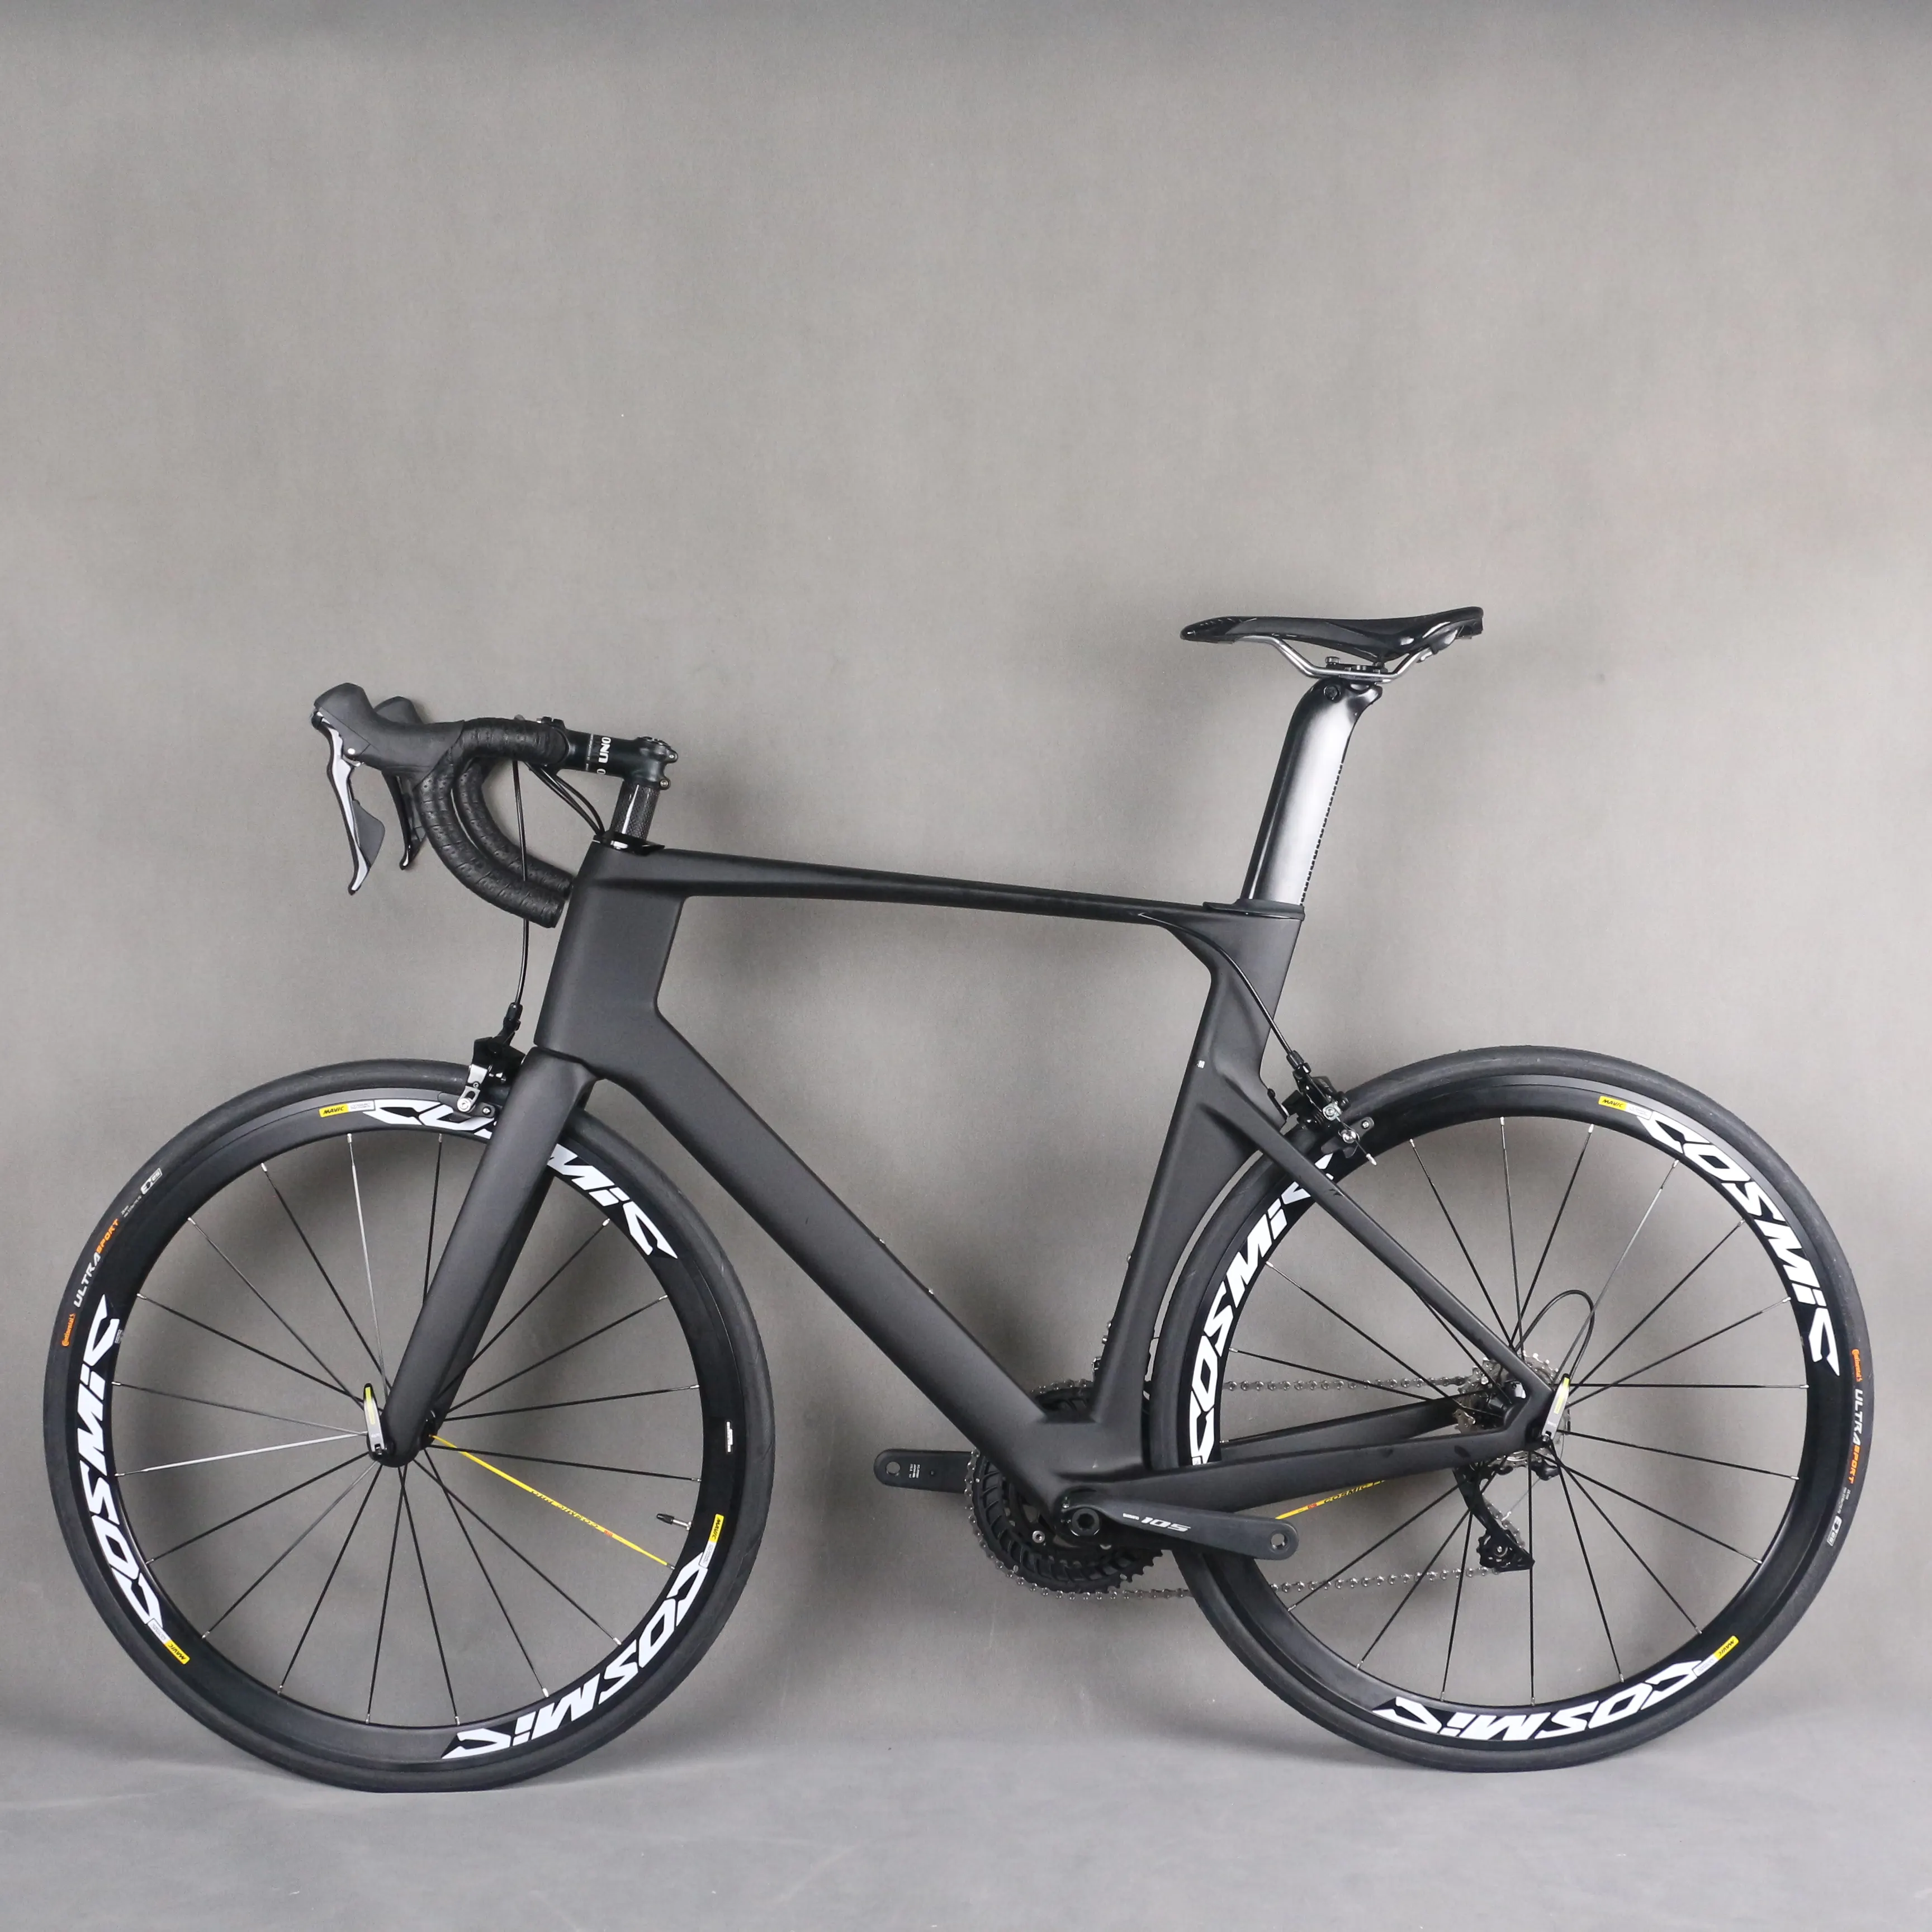 Newest 22 Speed Rim Brake Aero Road Complete Bike TT-X41 With 105 Groupset Available 44-56cm